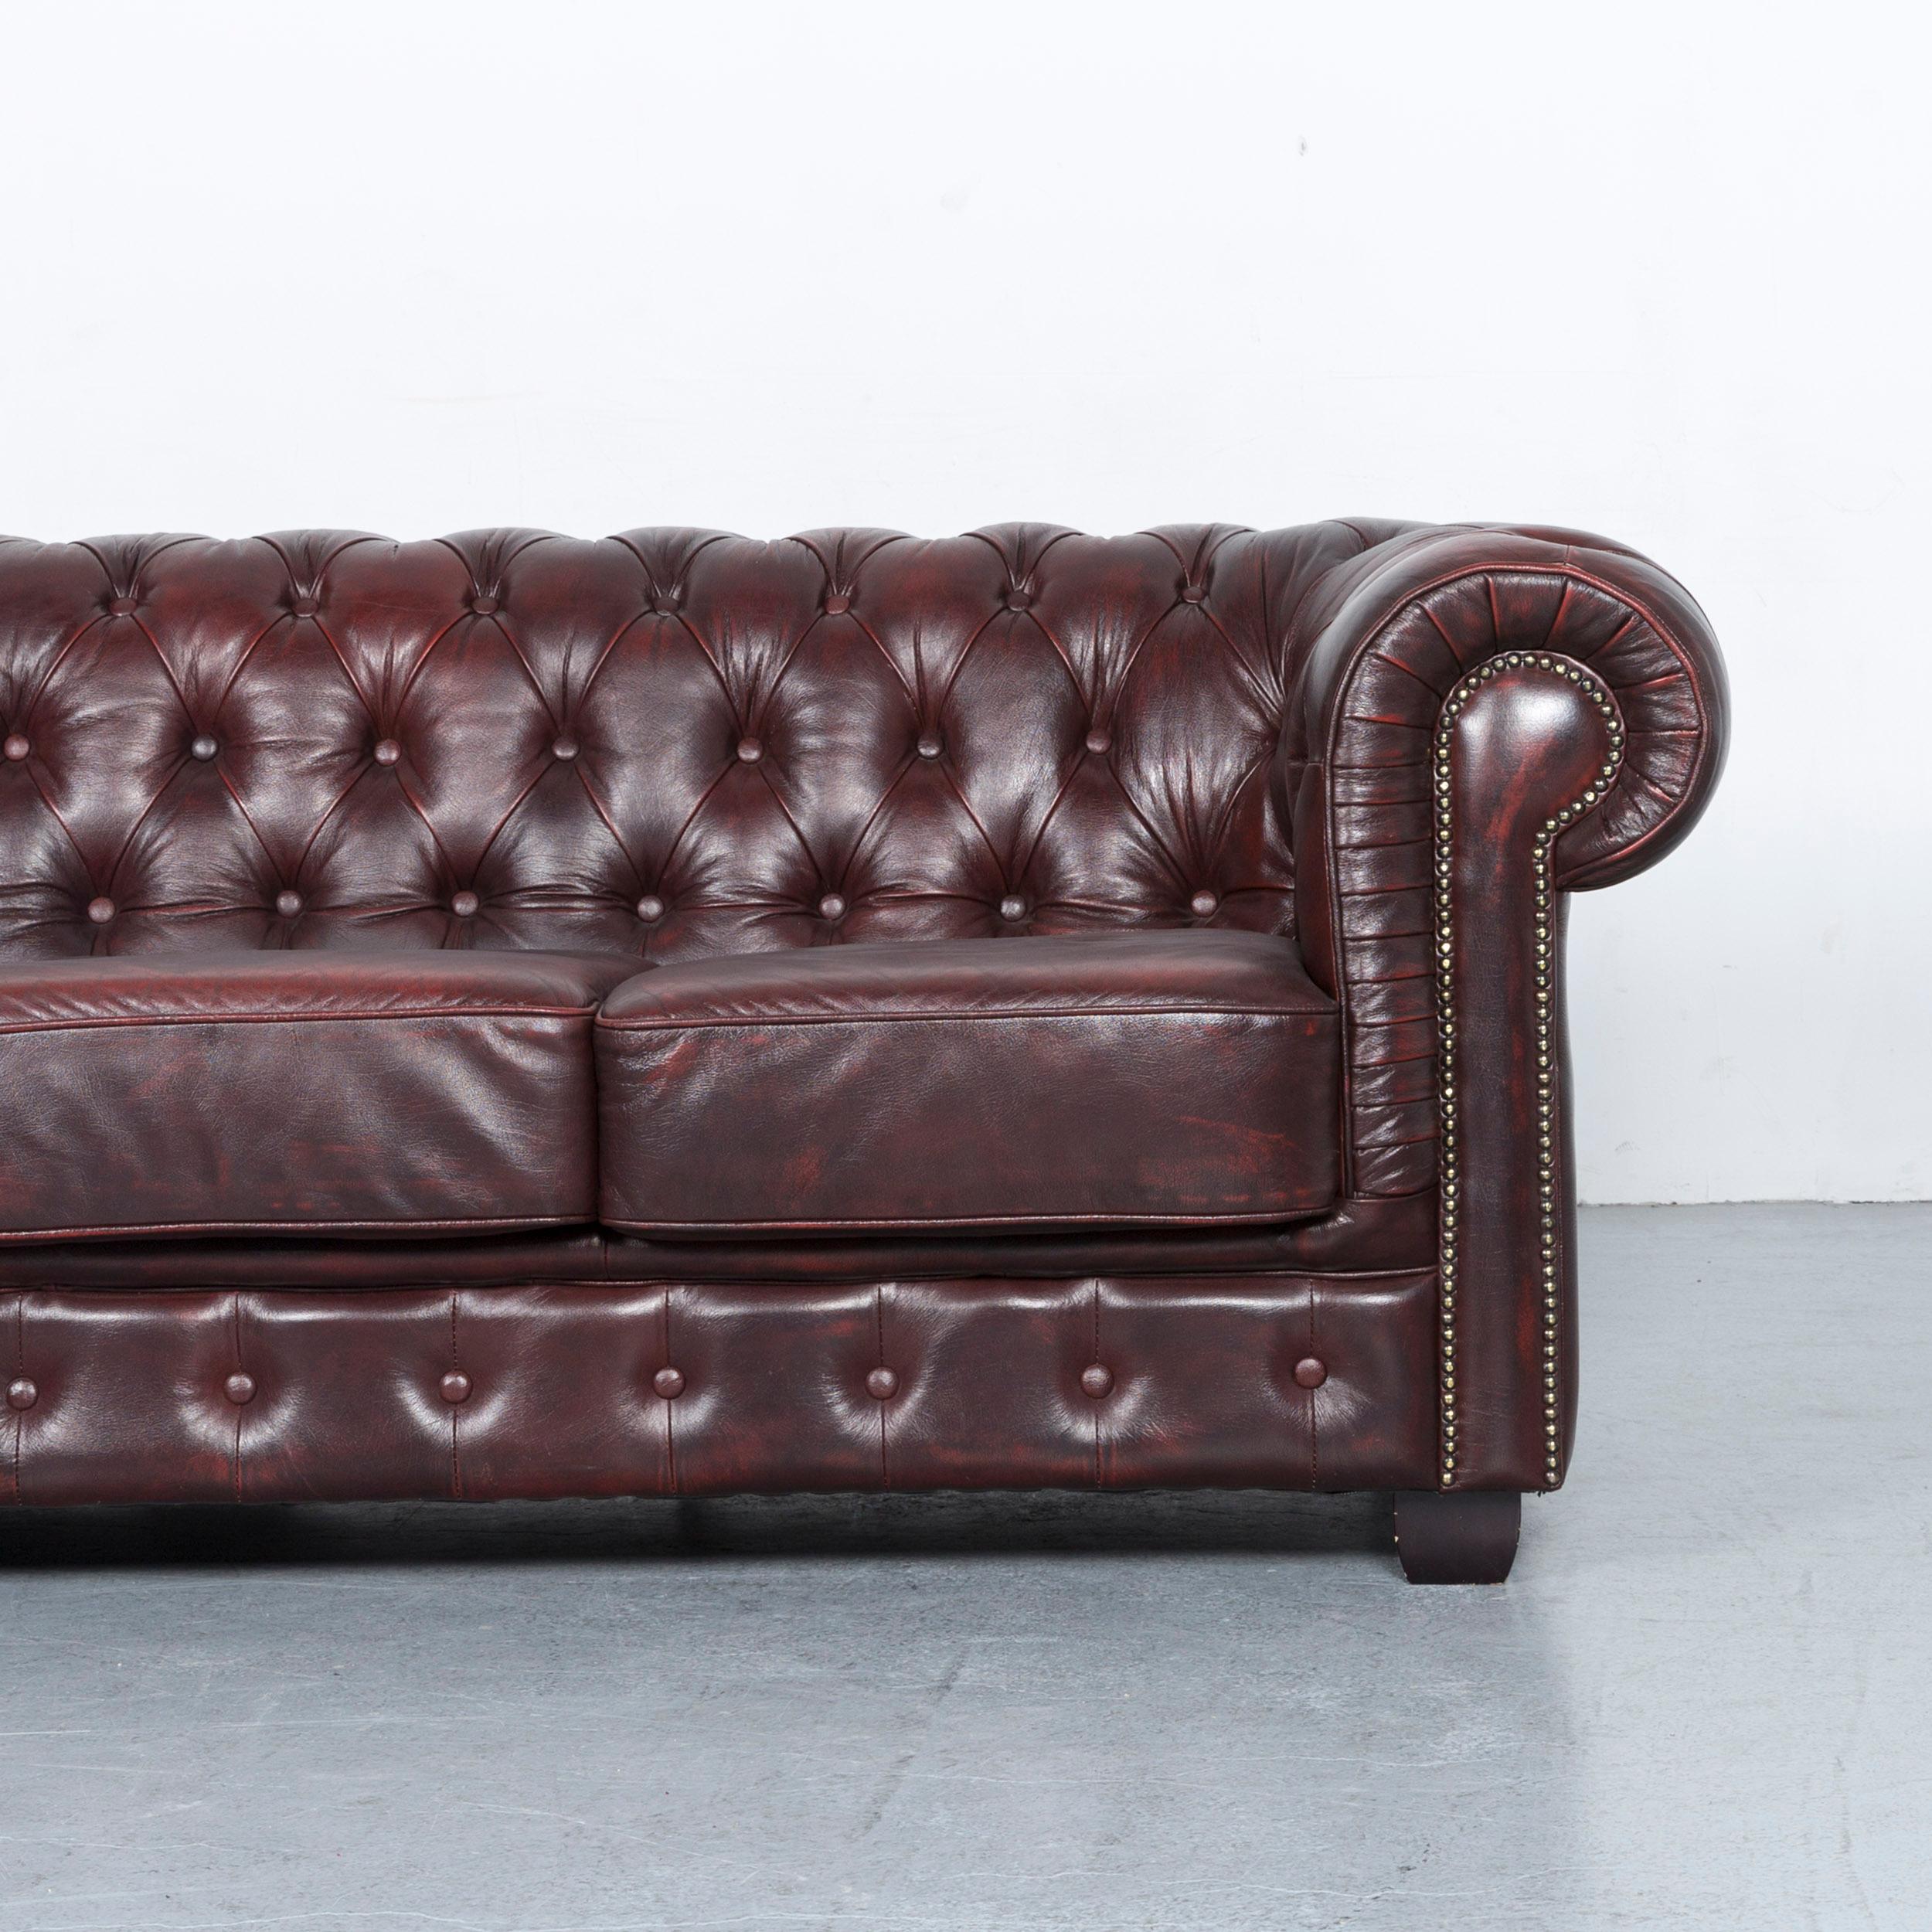 Contemporary Chesterfield Leather Sofa Brown Three-Seat Couch Vintage Retro